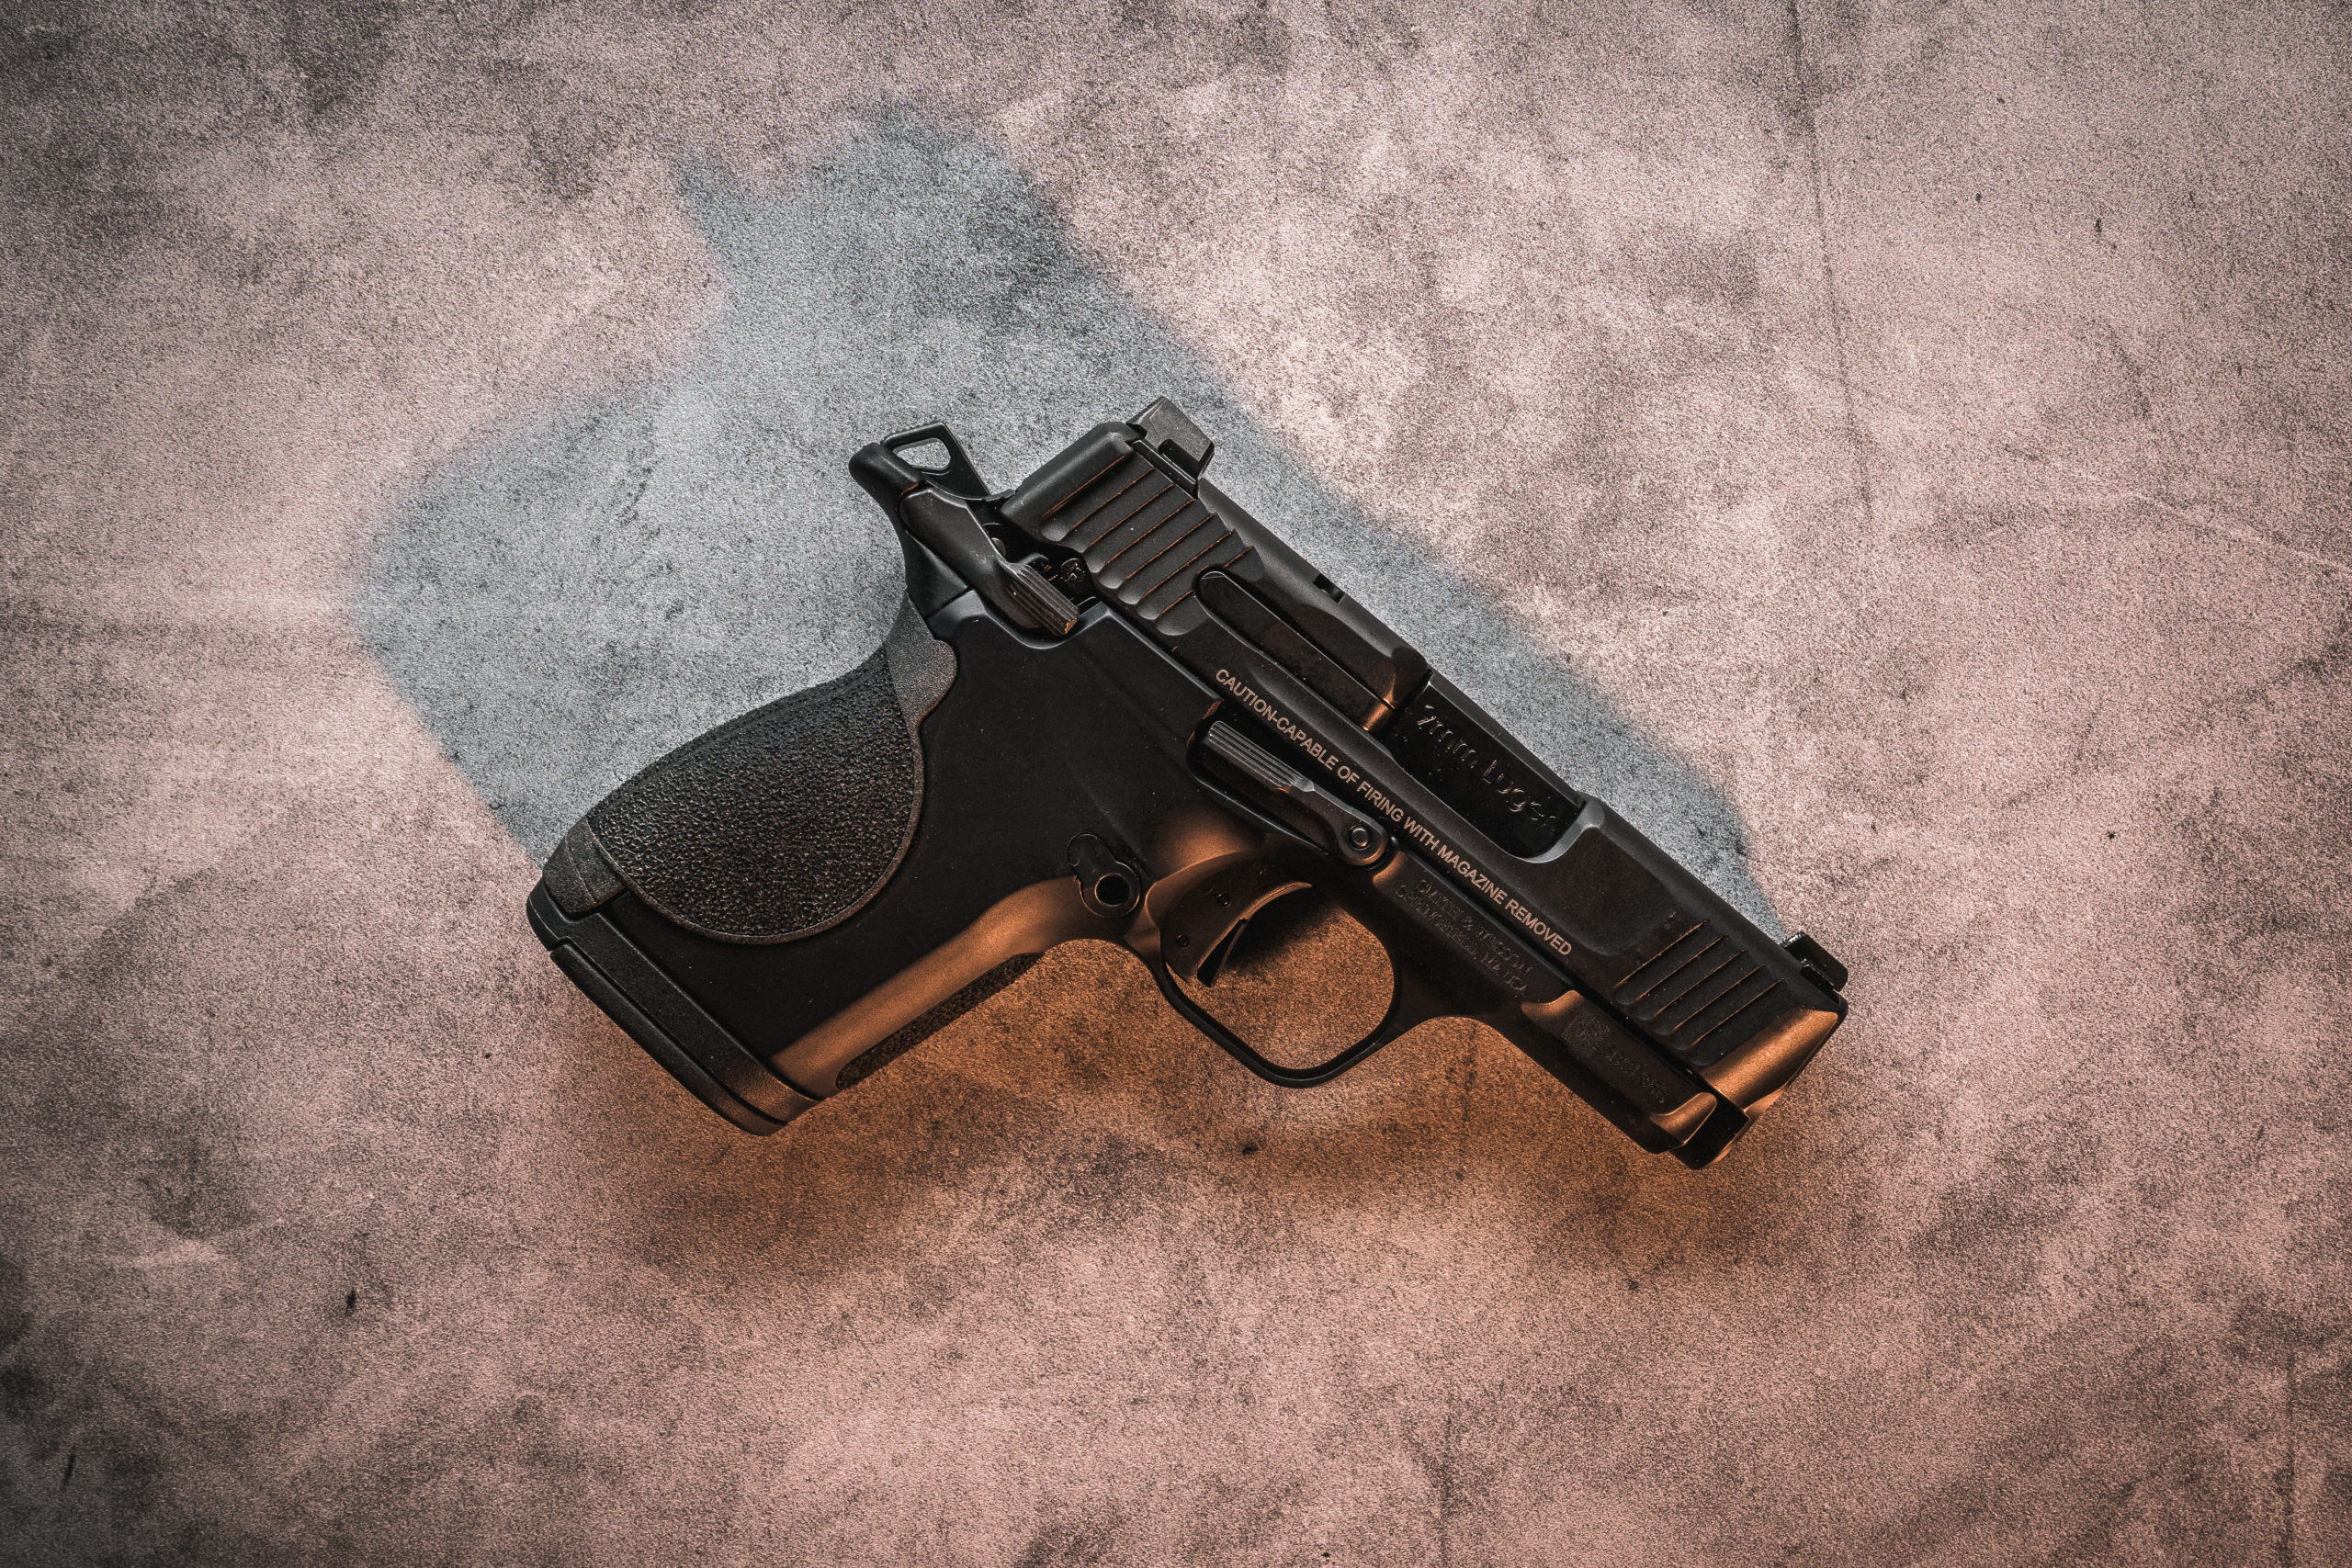 The NEW Smith & Wesson CSX Metal Framed Micro Compact Pistol